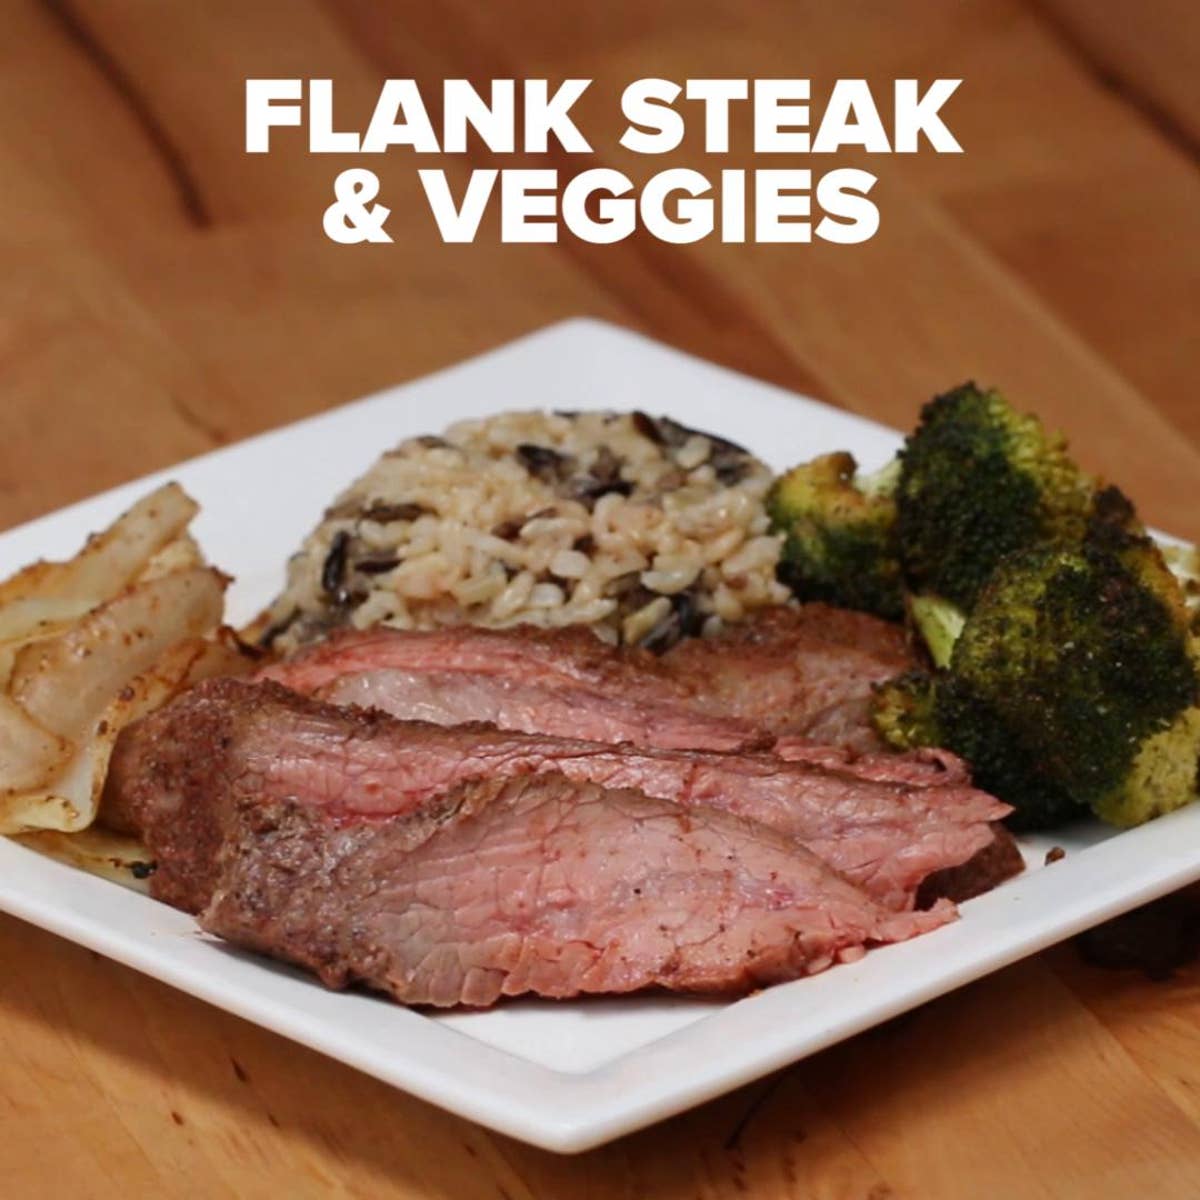 How To Cook Flank Steak (Oven, Grill, Or Pan) - Wholesome Yum